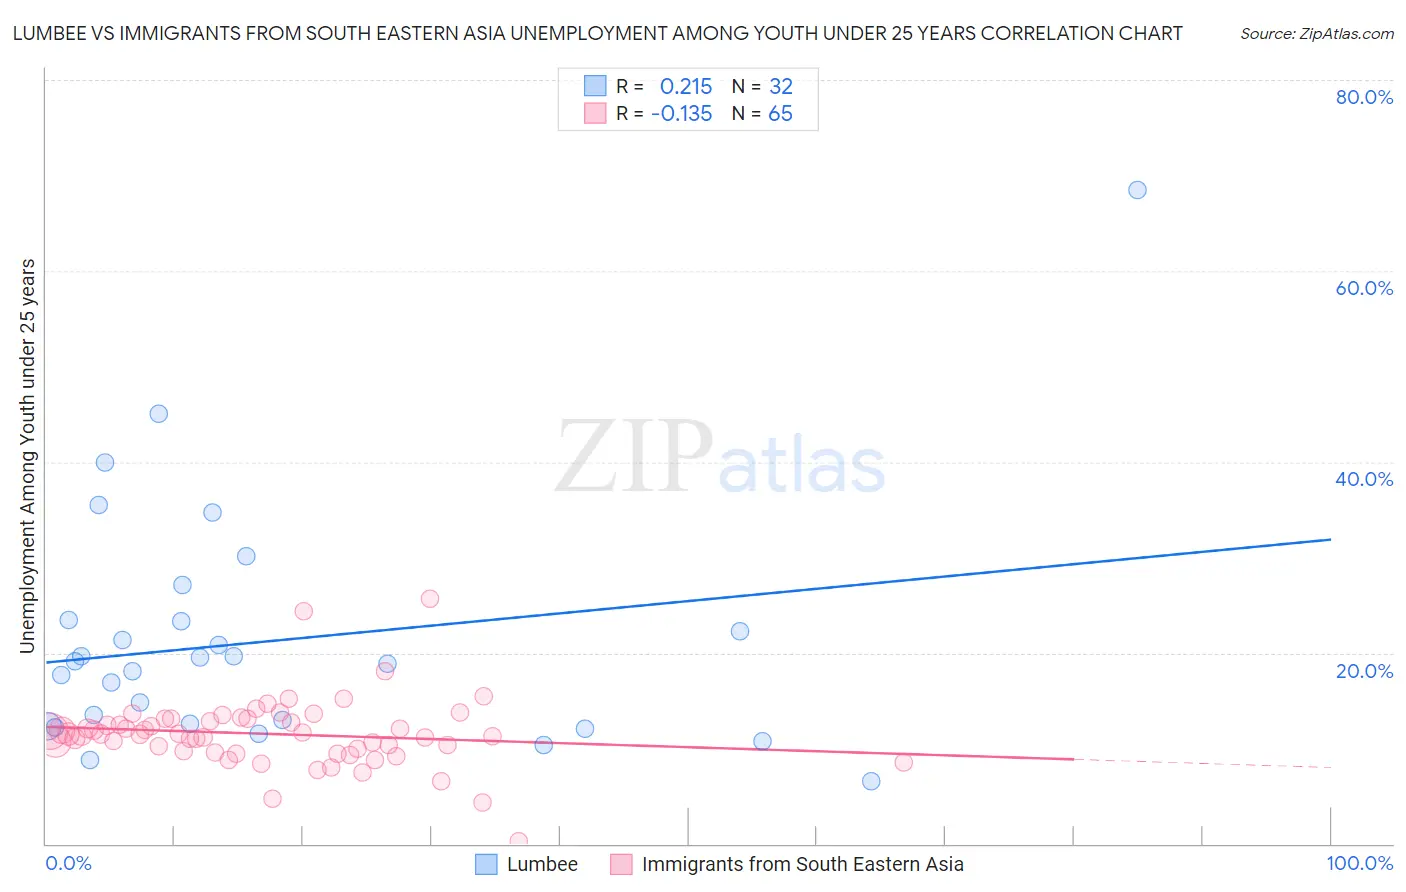 Lumbee vs Immigrants from South Eastern Asia Unemployment Among Youth under 25 years